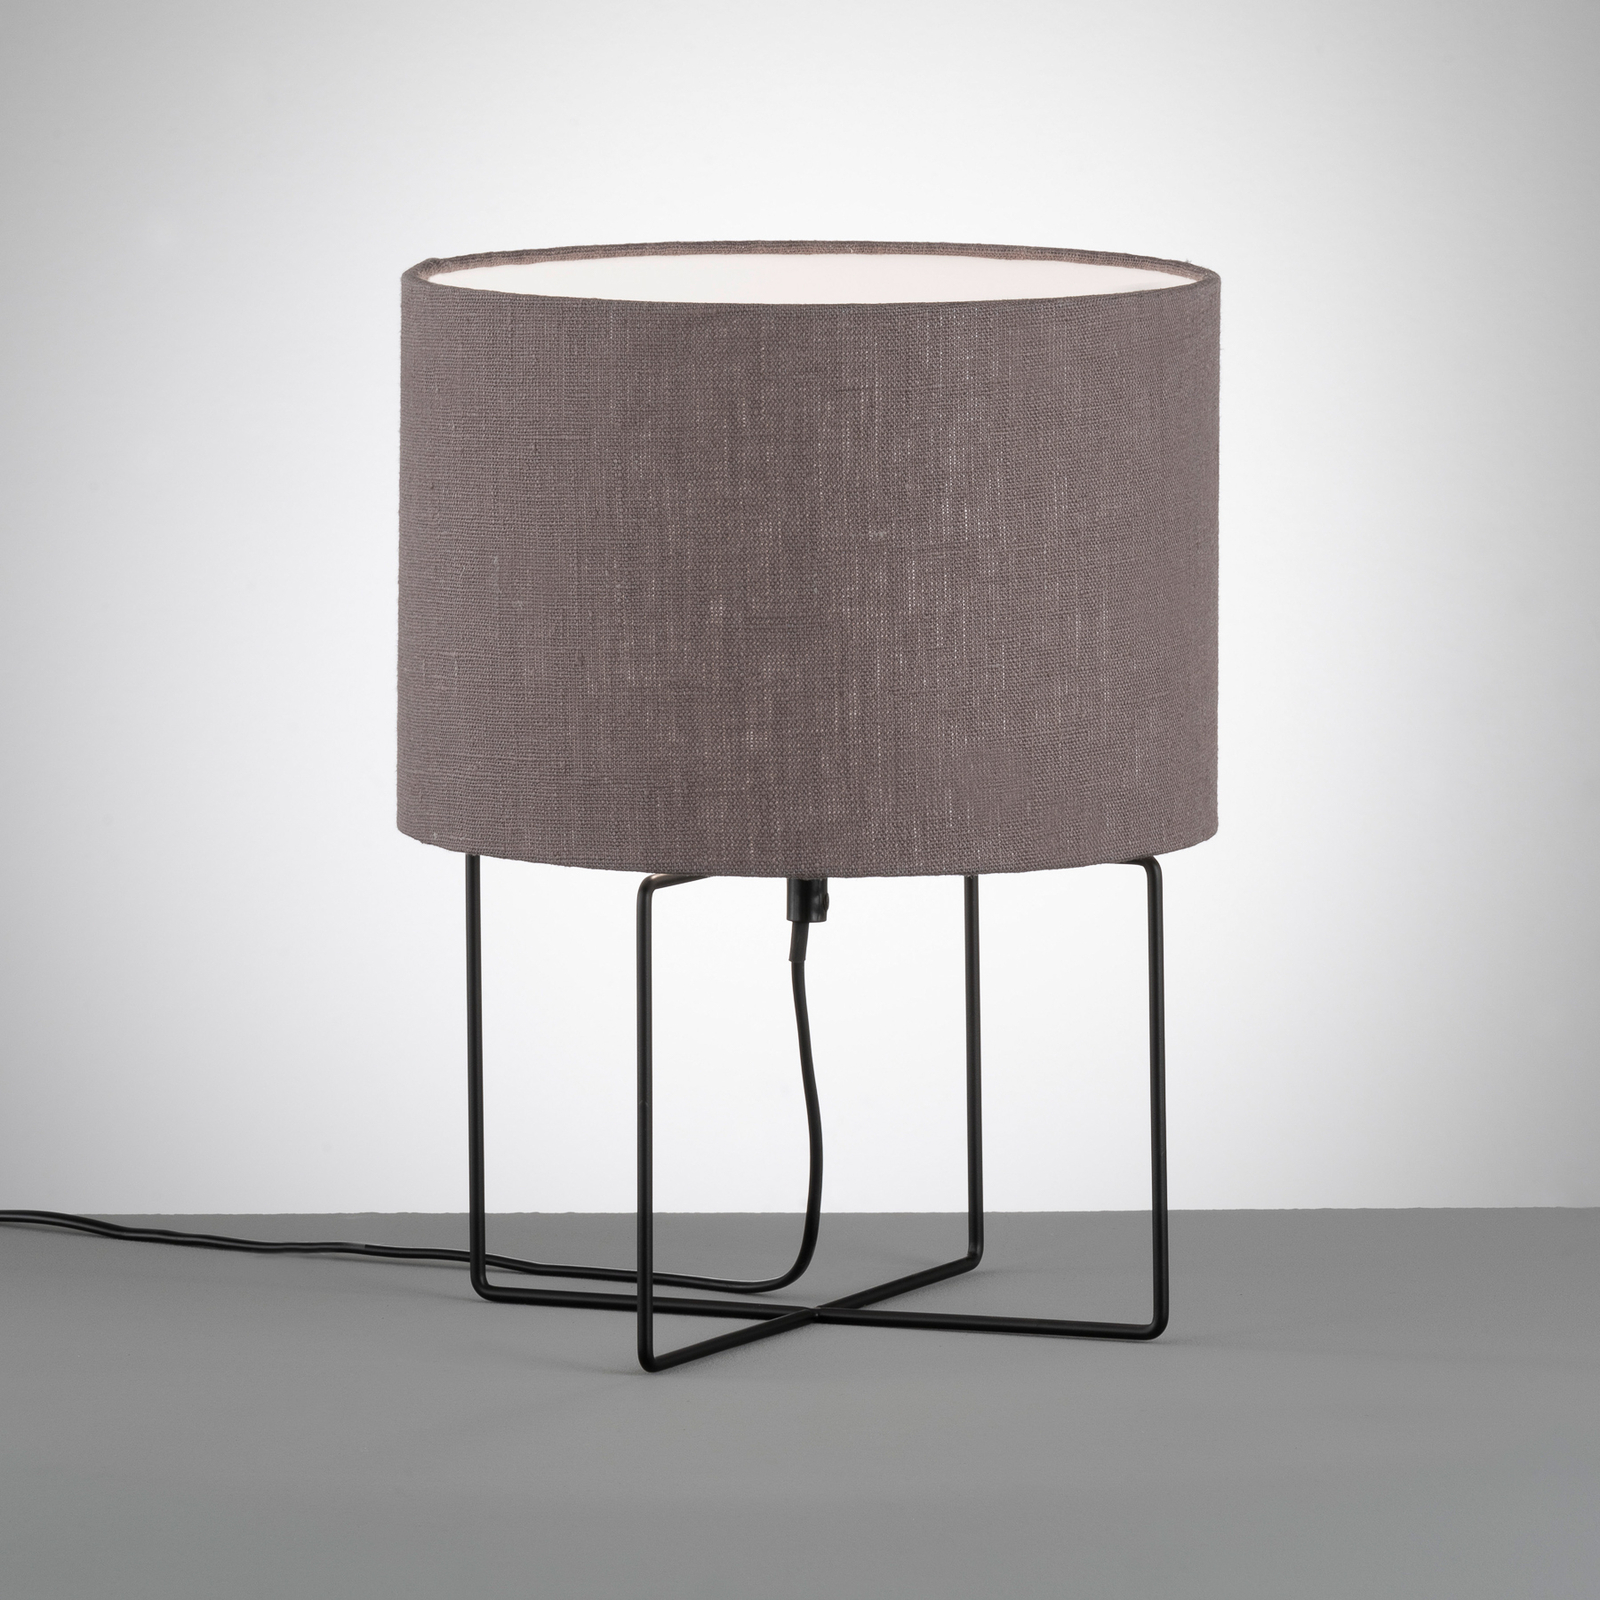 Java table lamp with a grey linen lampshade